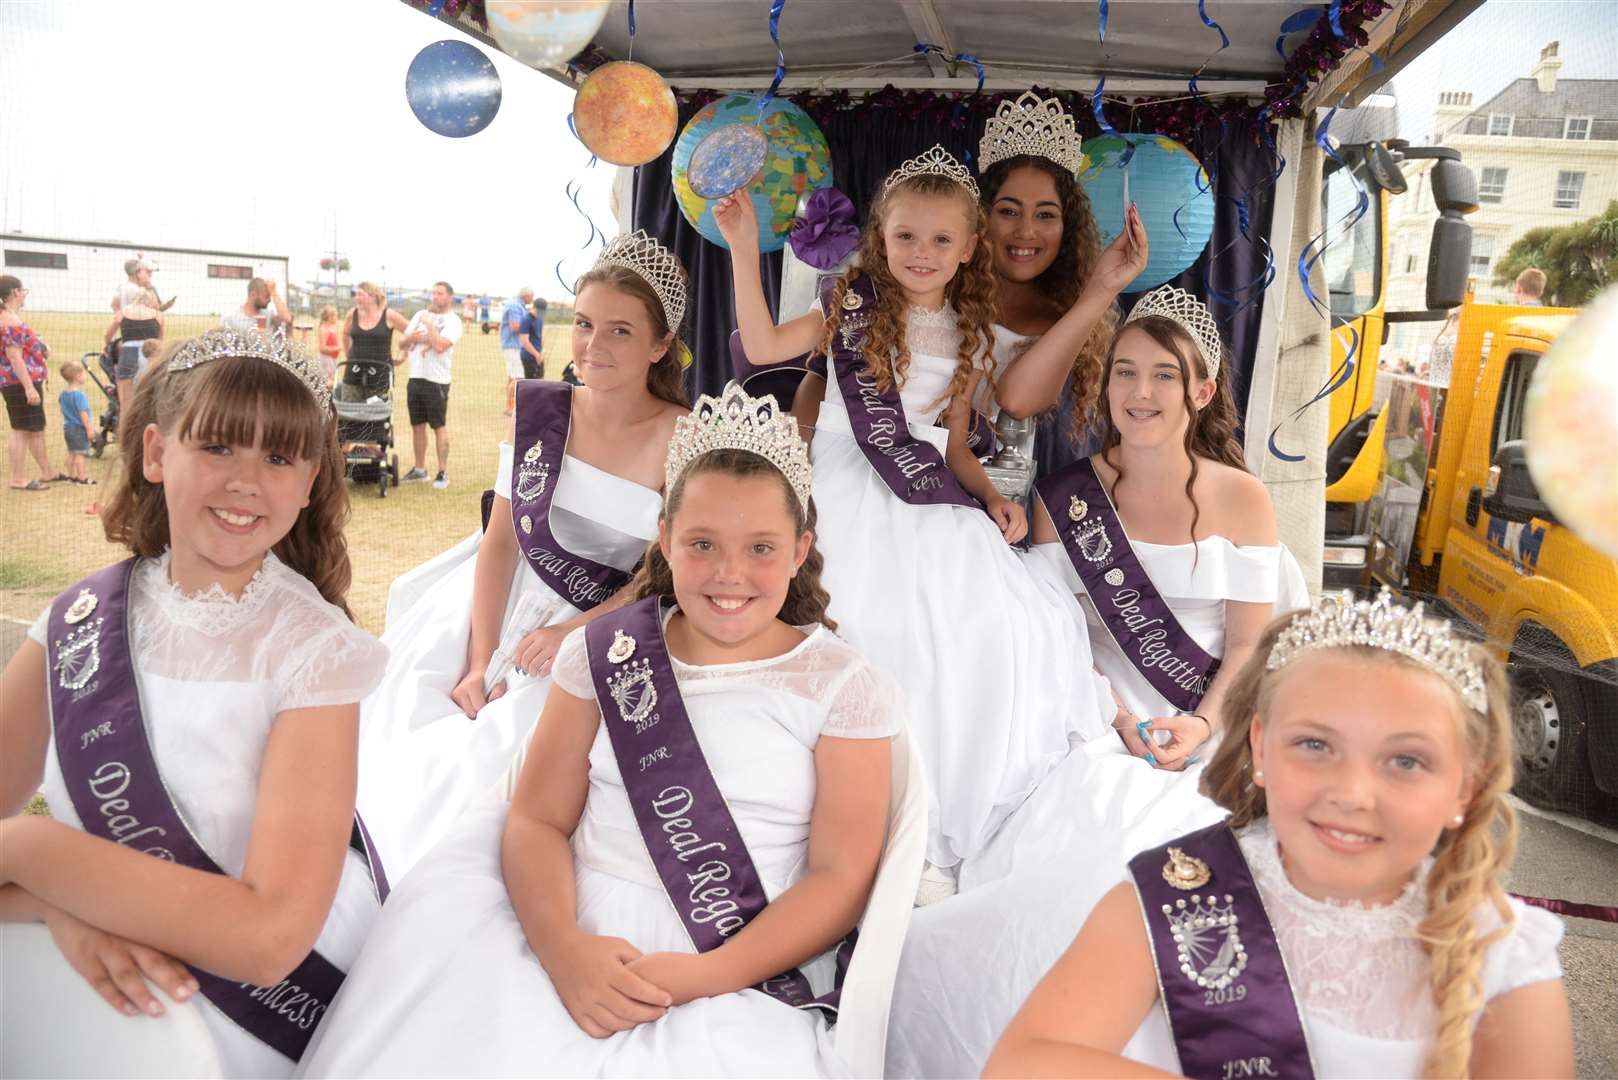 The 2019 Deal and Walmer Carnival Court headed their carnival last July. Picture: Chris Davey.